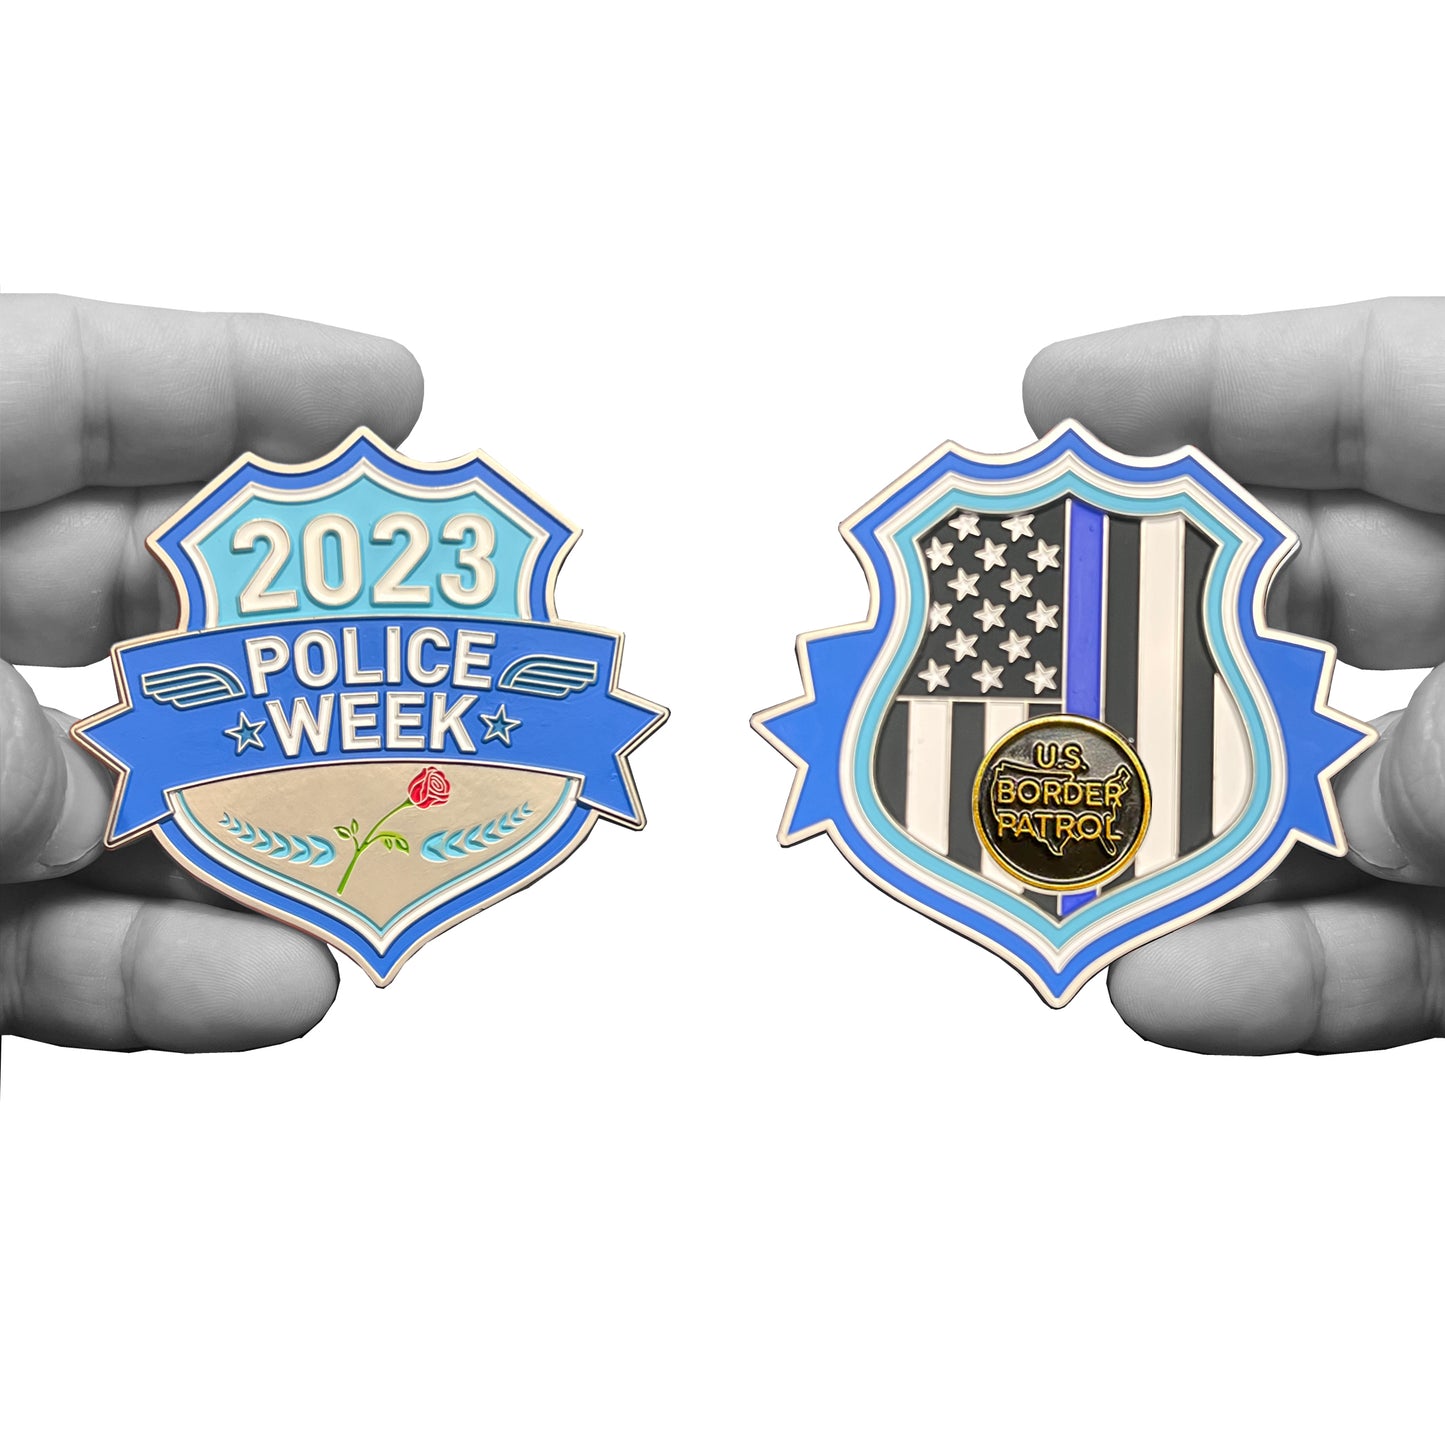 Border Patrol Agent Police Week 2023 Commemorative Thin Blue Line Memorial Challenge Coin